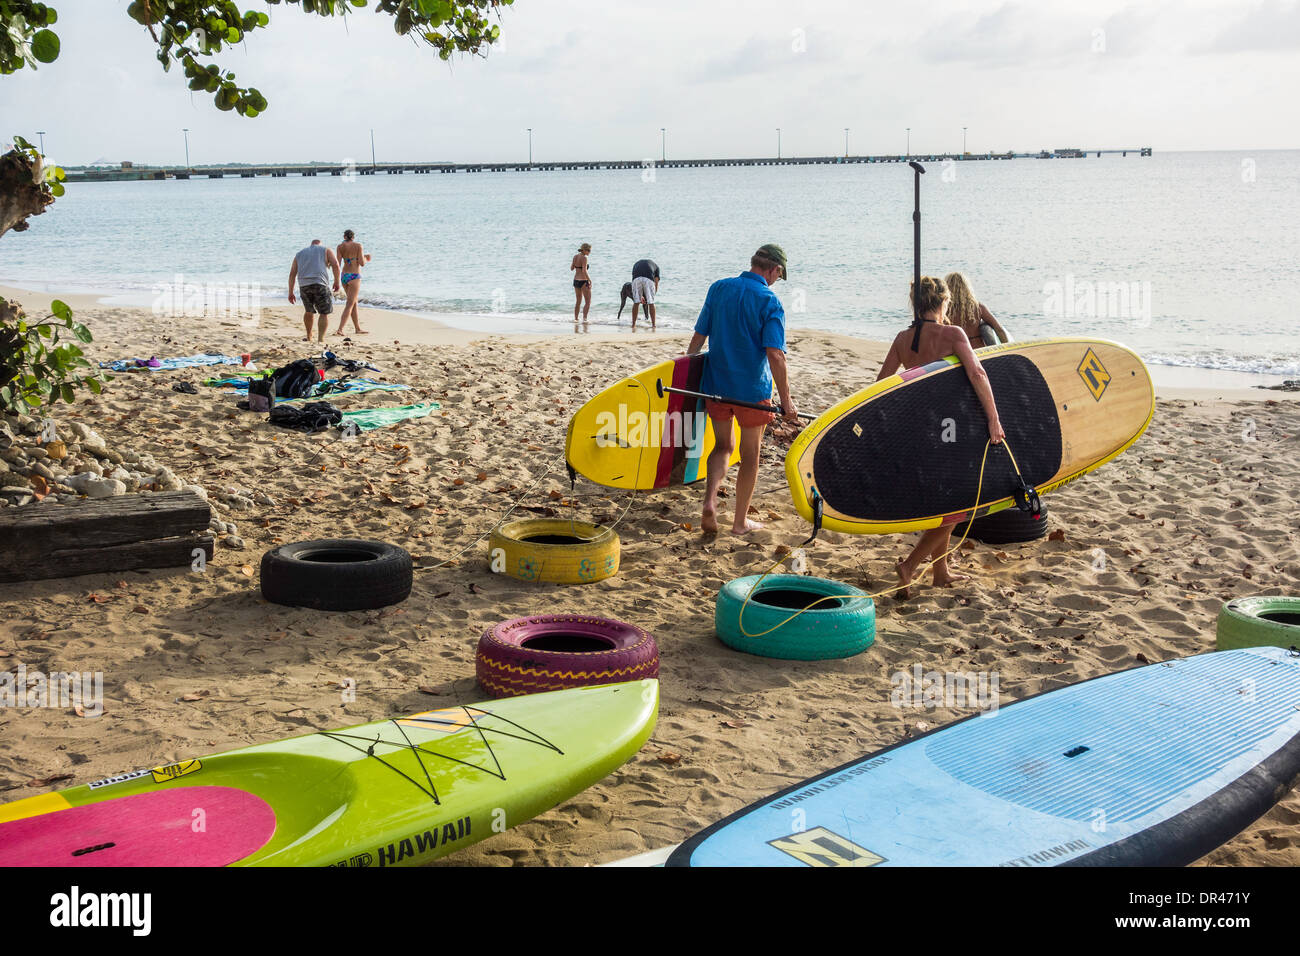 Three people carry their stand-up paddle boards toward the Caribbean from the beach in St. Croix, U.S. Virgin Islands. Stock Photo